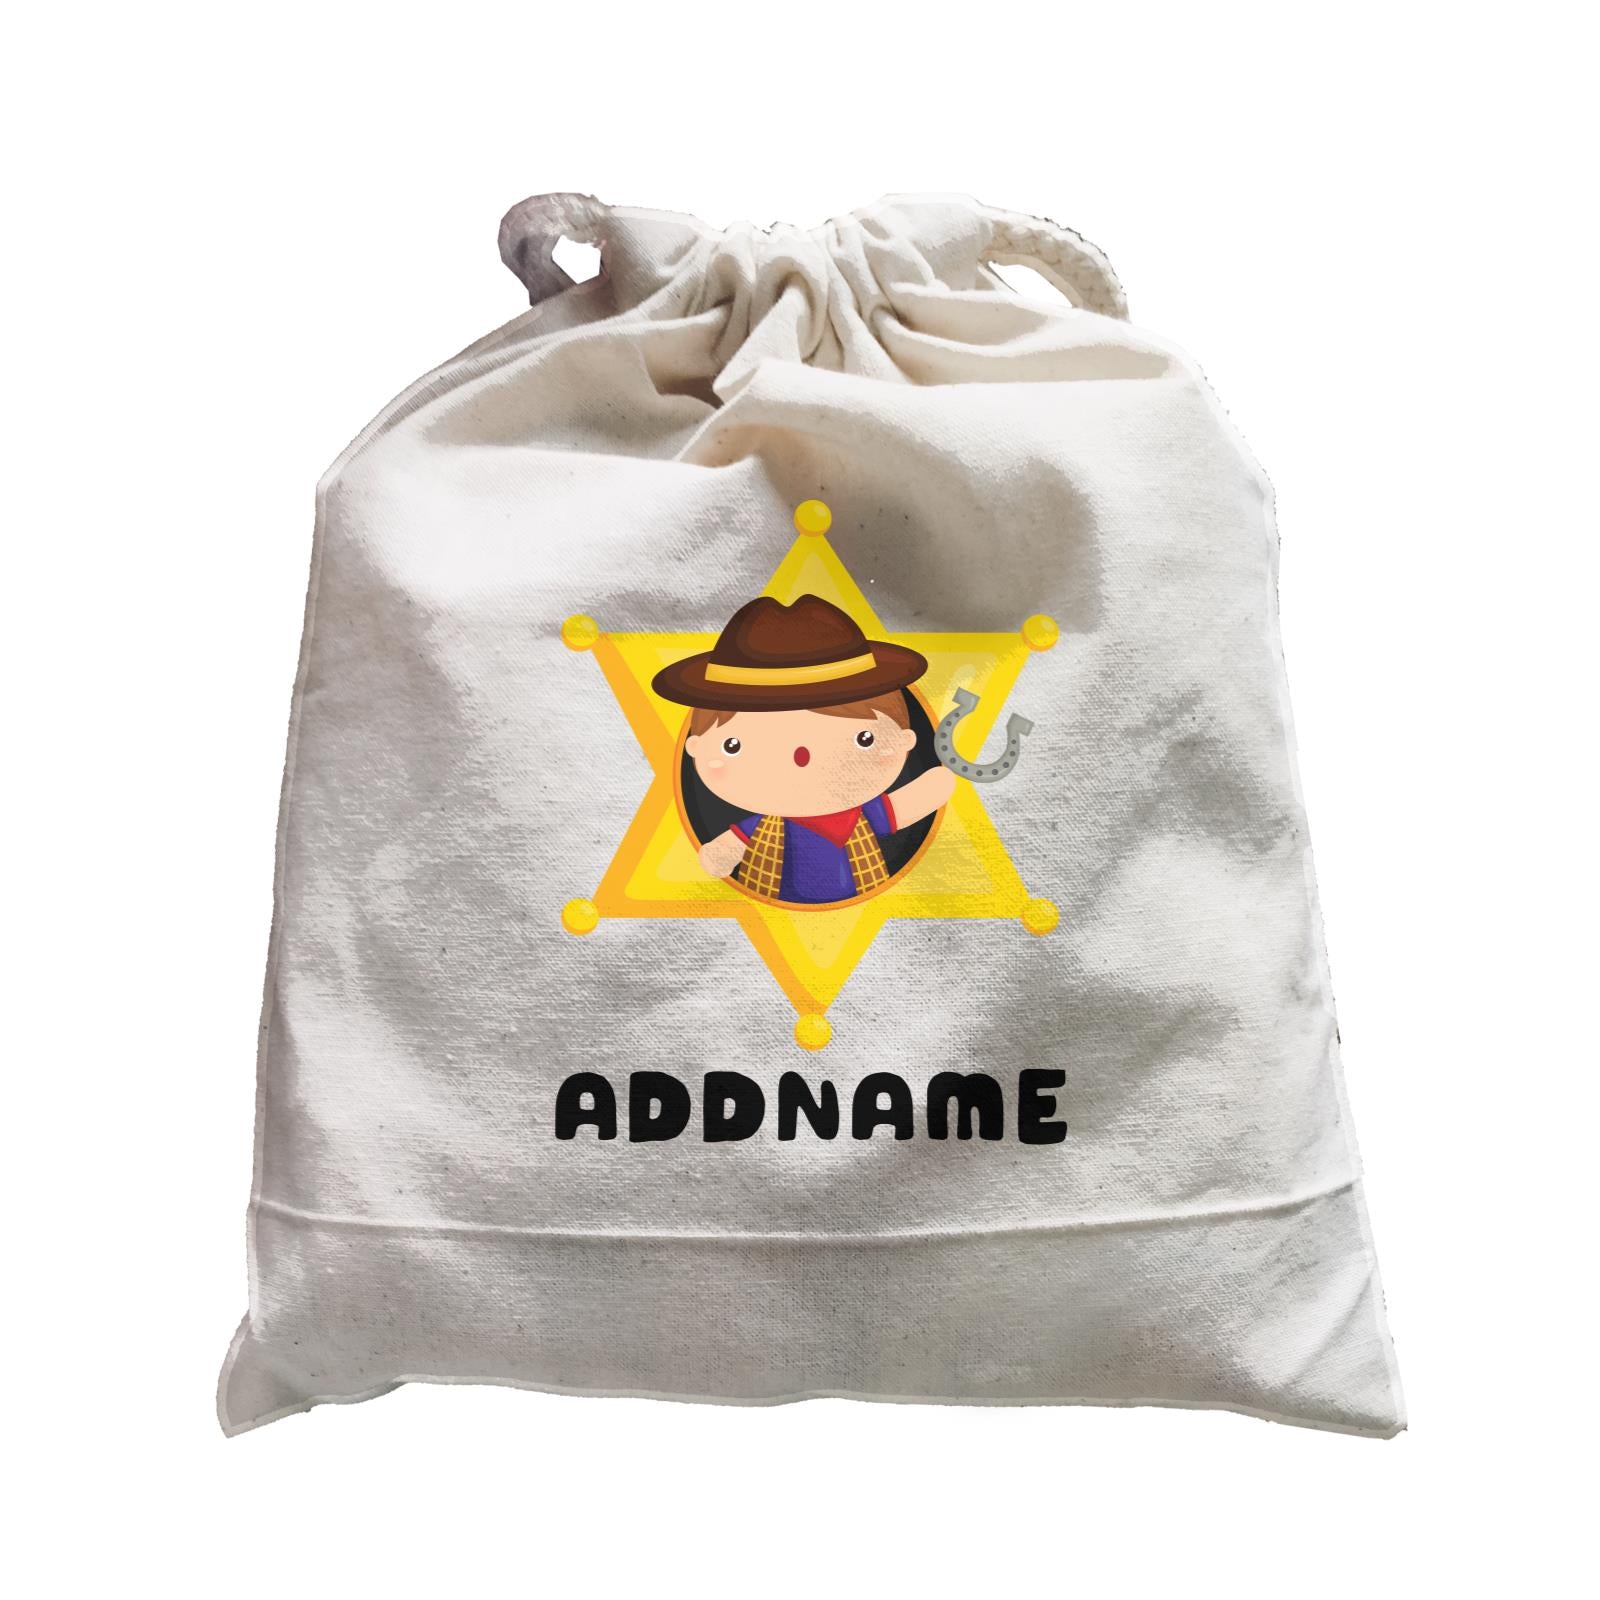 Birthday Cowboy Style Little Cowboy Holding Hoe In Star Badge Addname Satchel